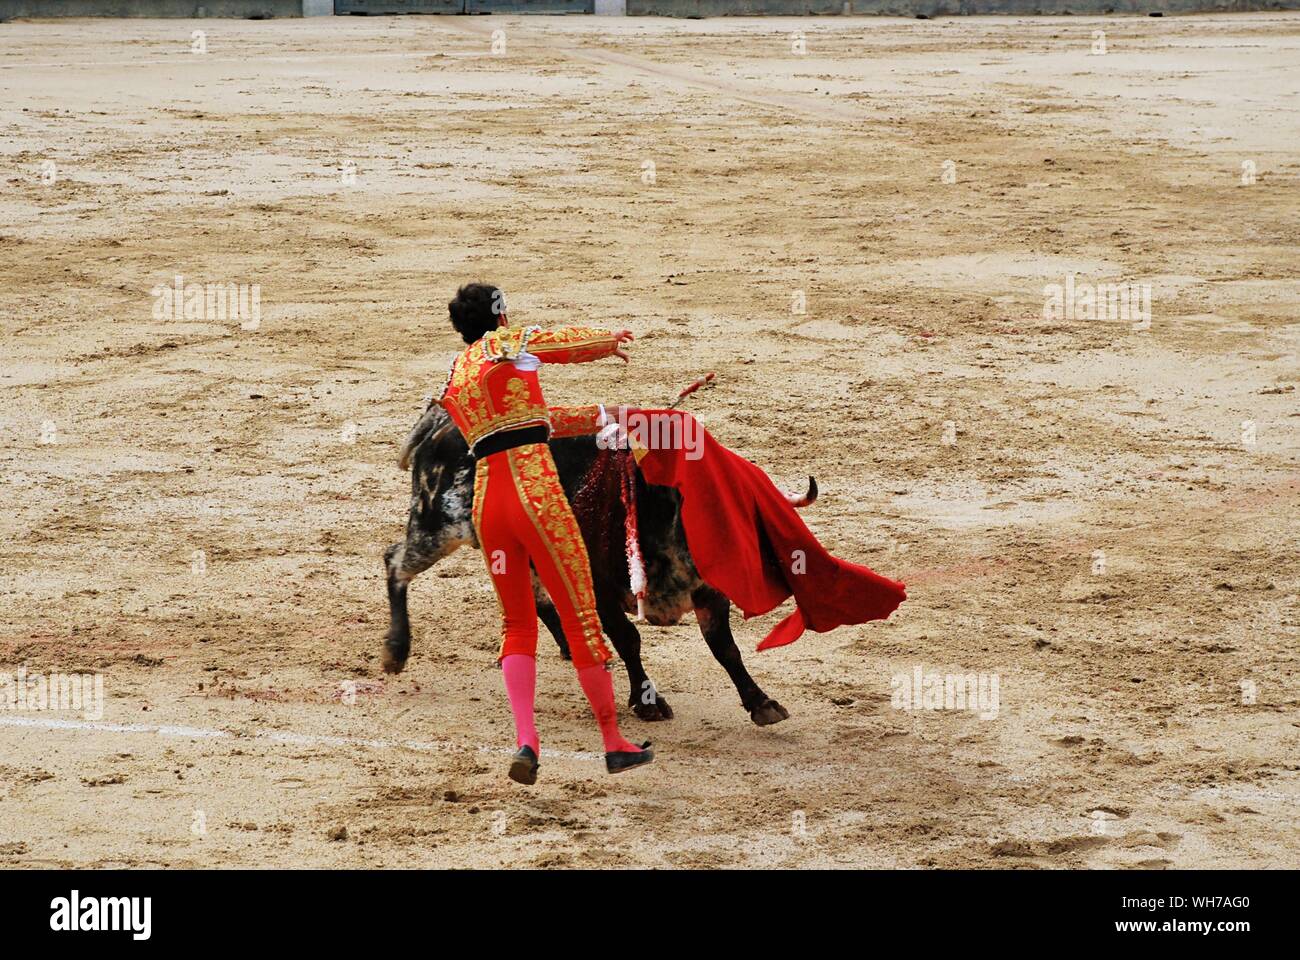 Bullfighter Holding Red Cape With Bull Stock Photo Alamy